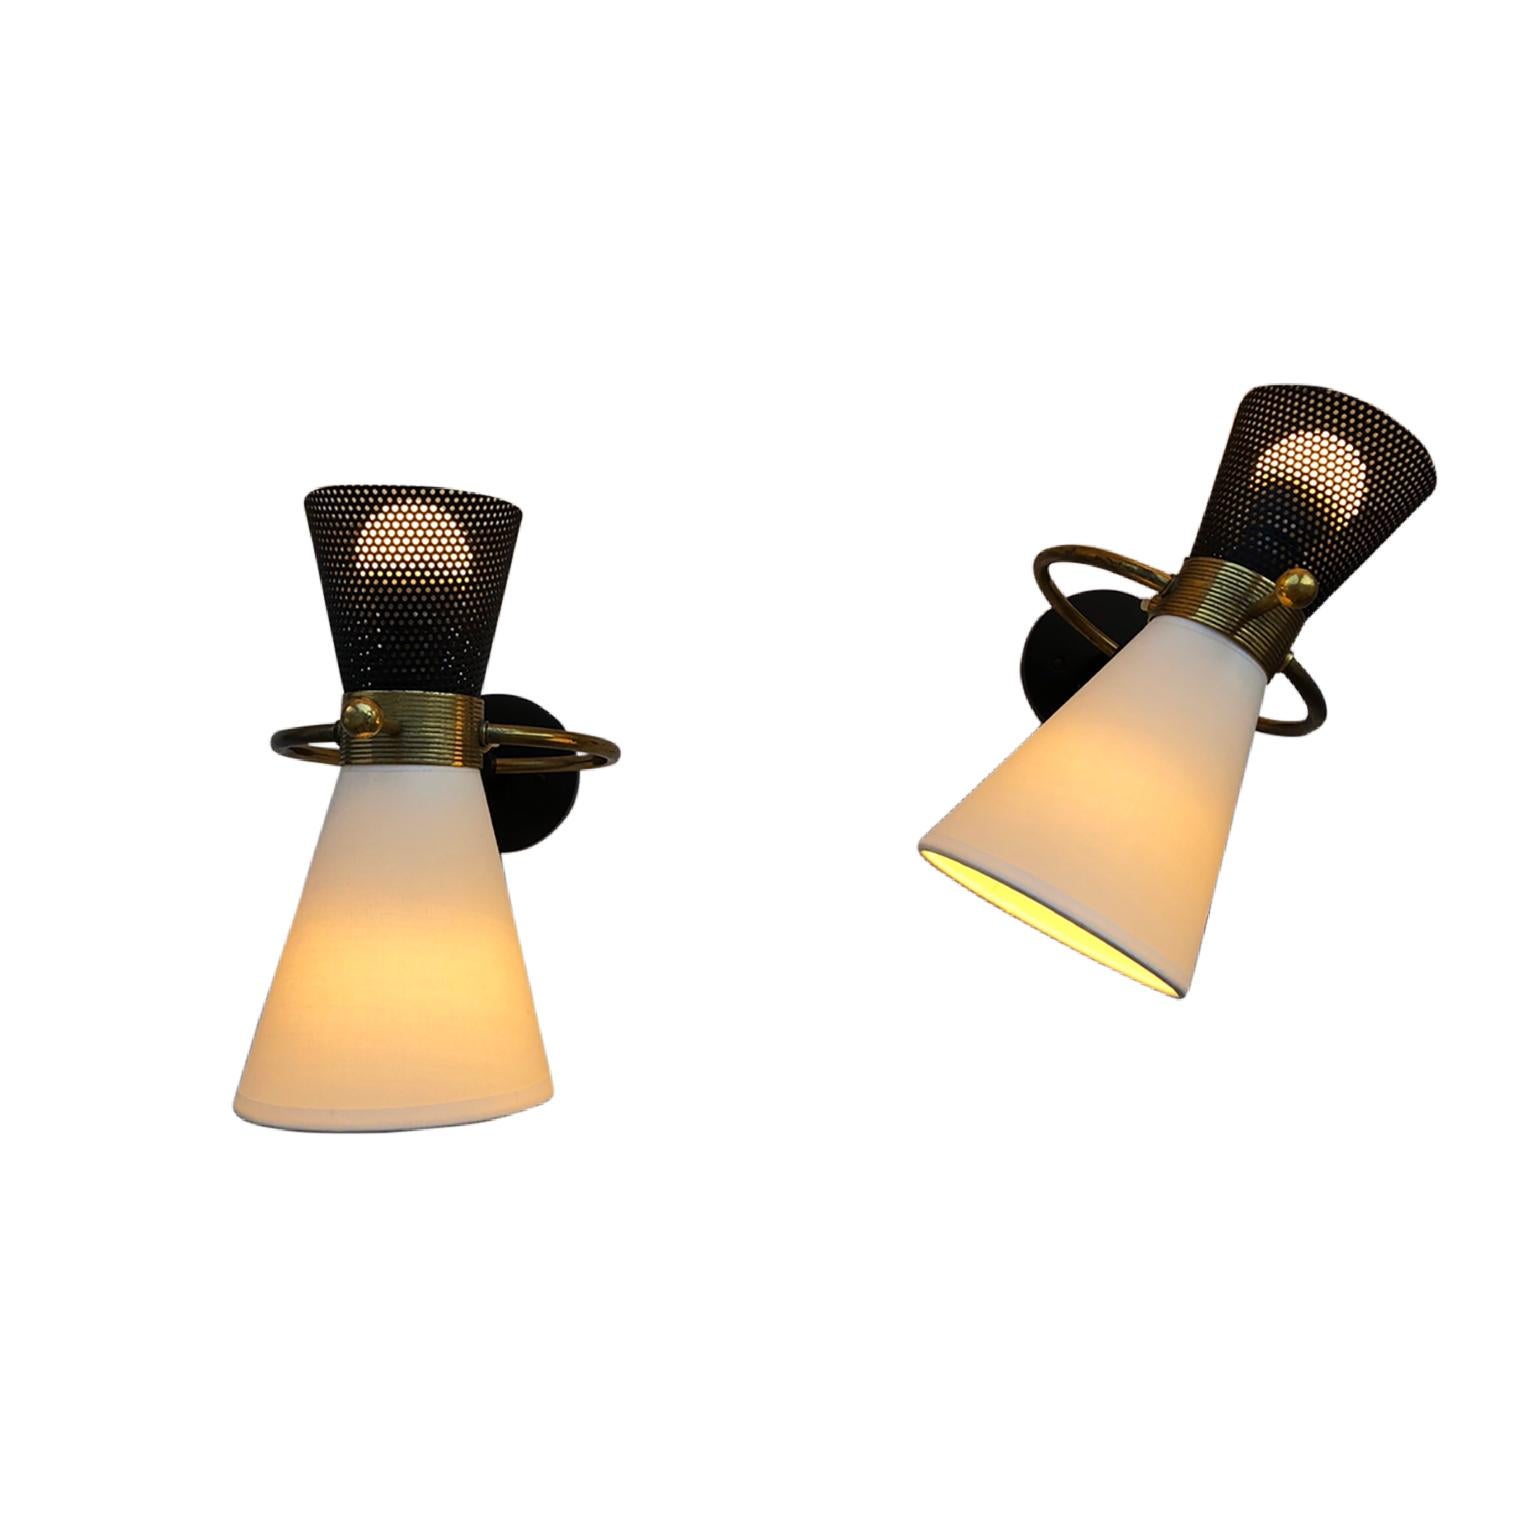 Mid-Century Modern Pair of Sconces by Maison Arlus, 1950